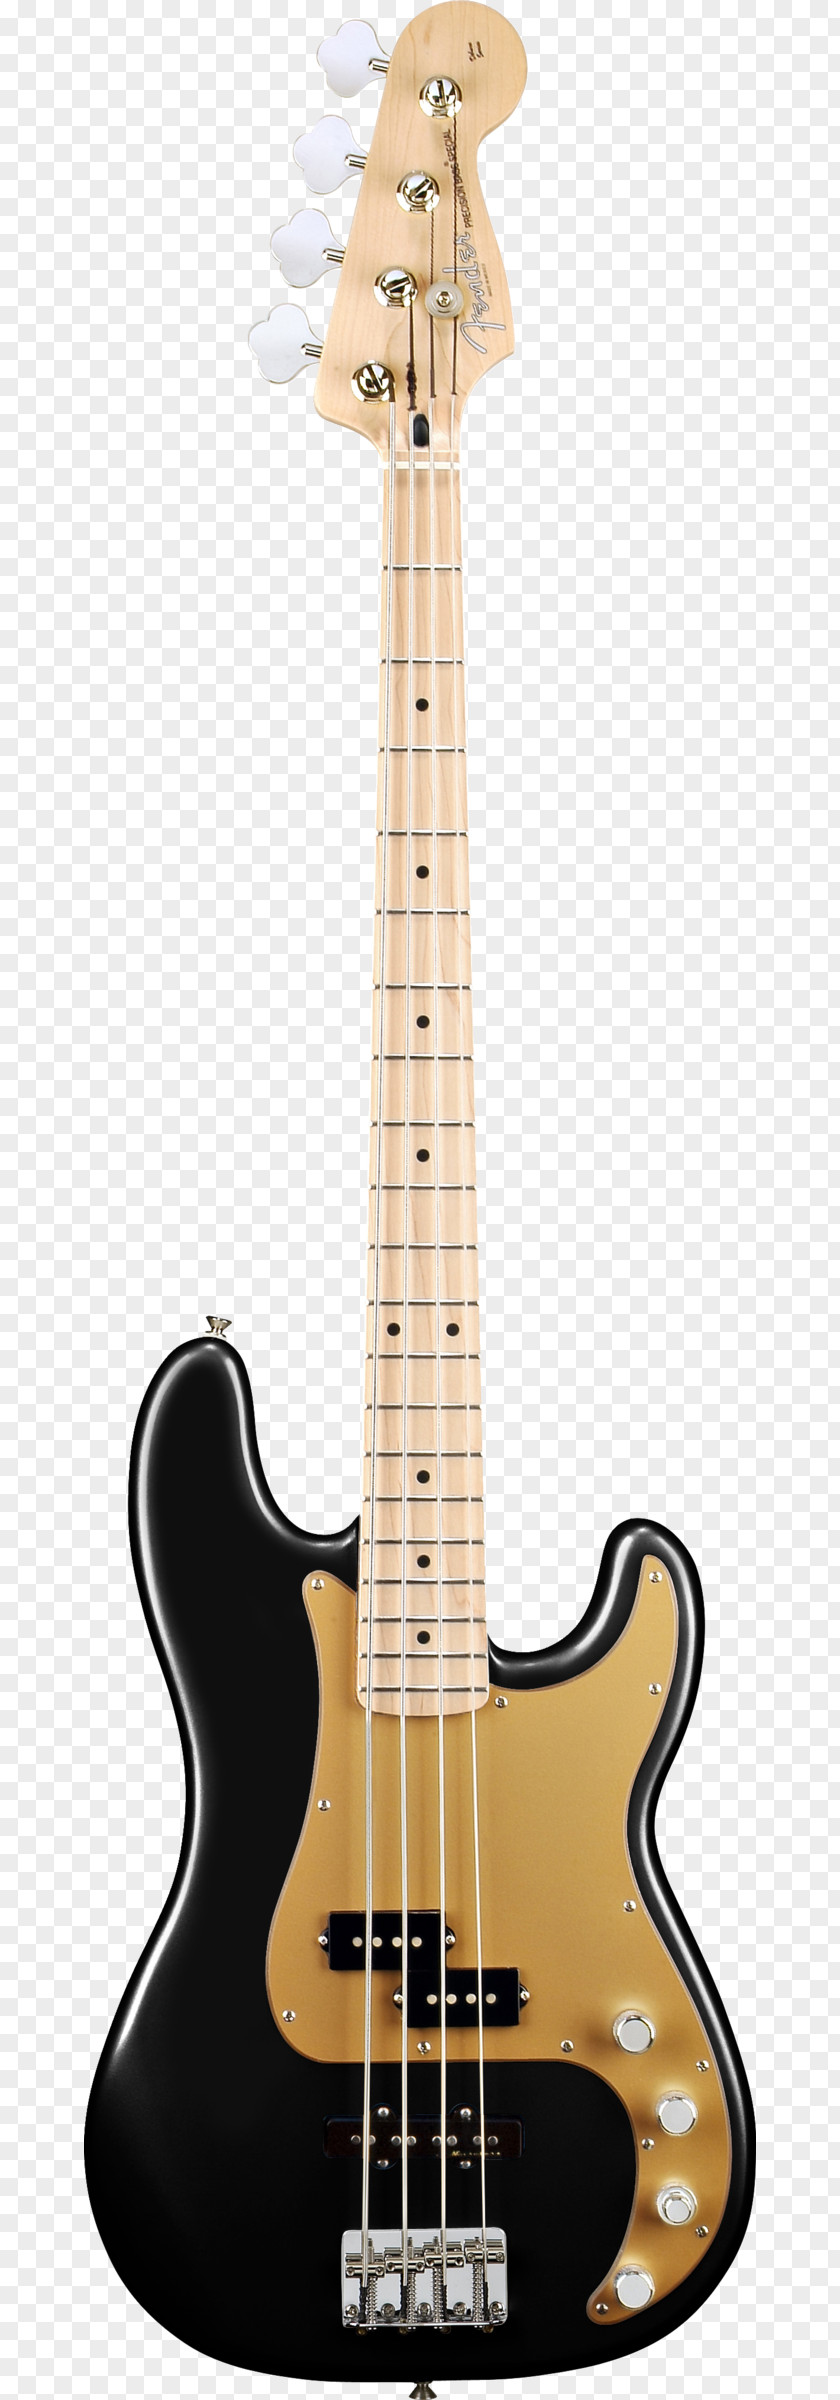 Guitar Amplifier Fender Precision Bass Musical Instruments Corporation American Deluxe Series Fingerboard PNG